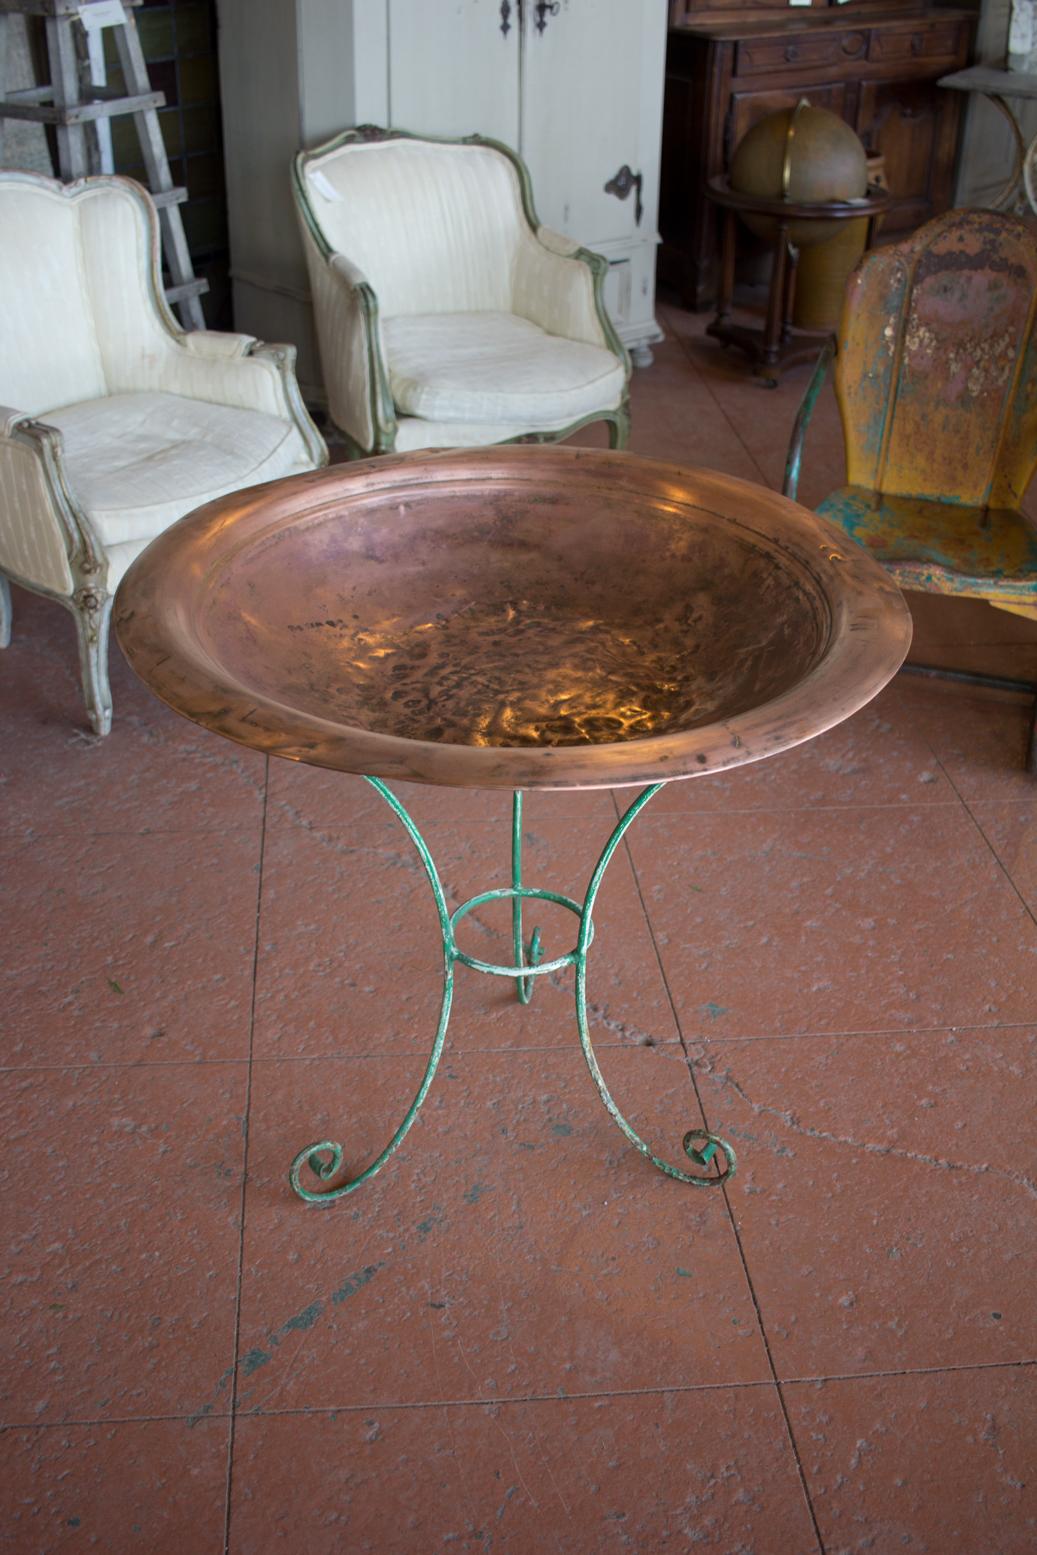 Vintage French garden planter or birdbath. The bowl is beaten copper which sits on a 3-legged scrolled base with original paint residue.